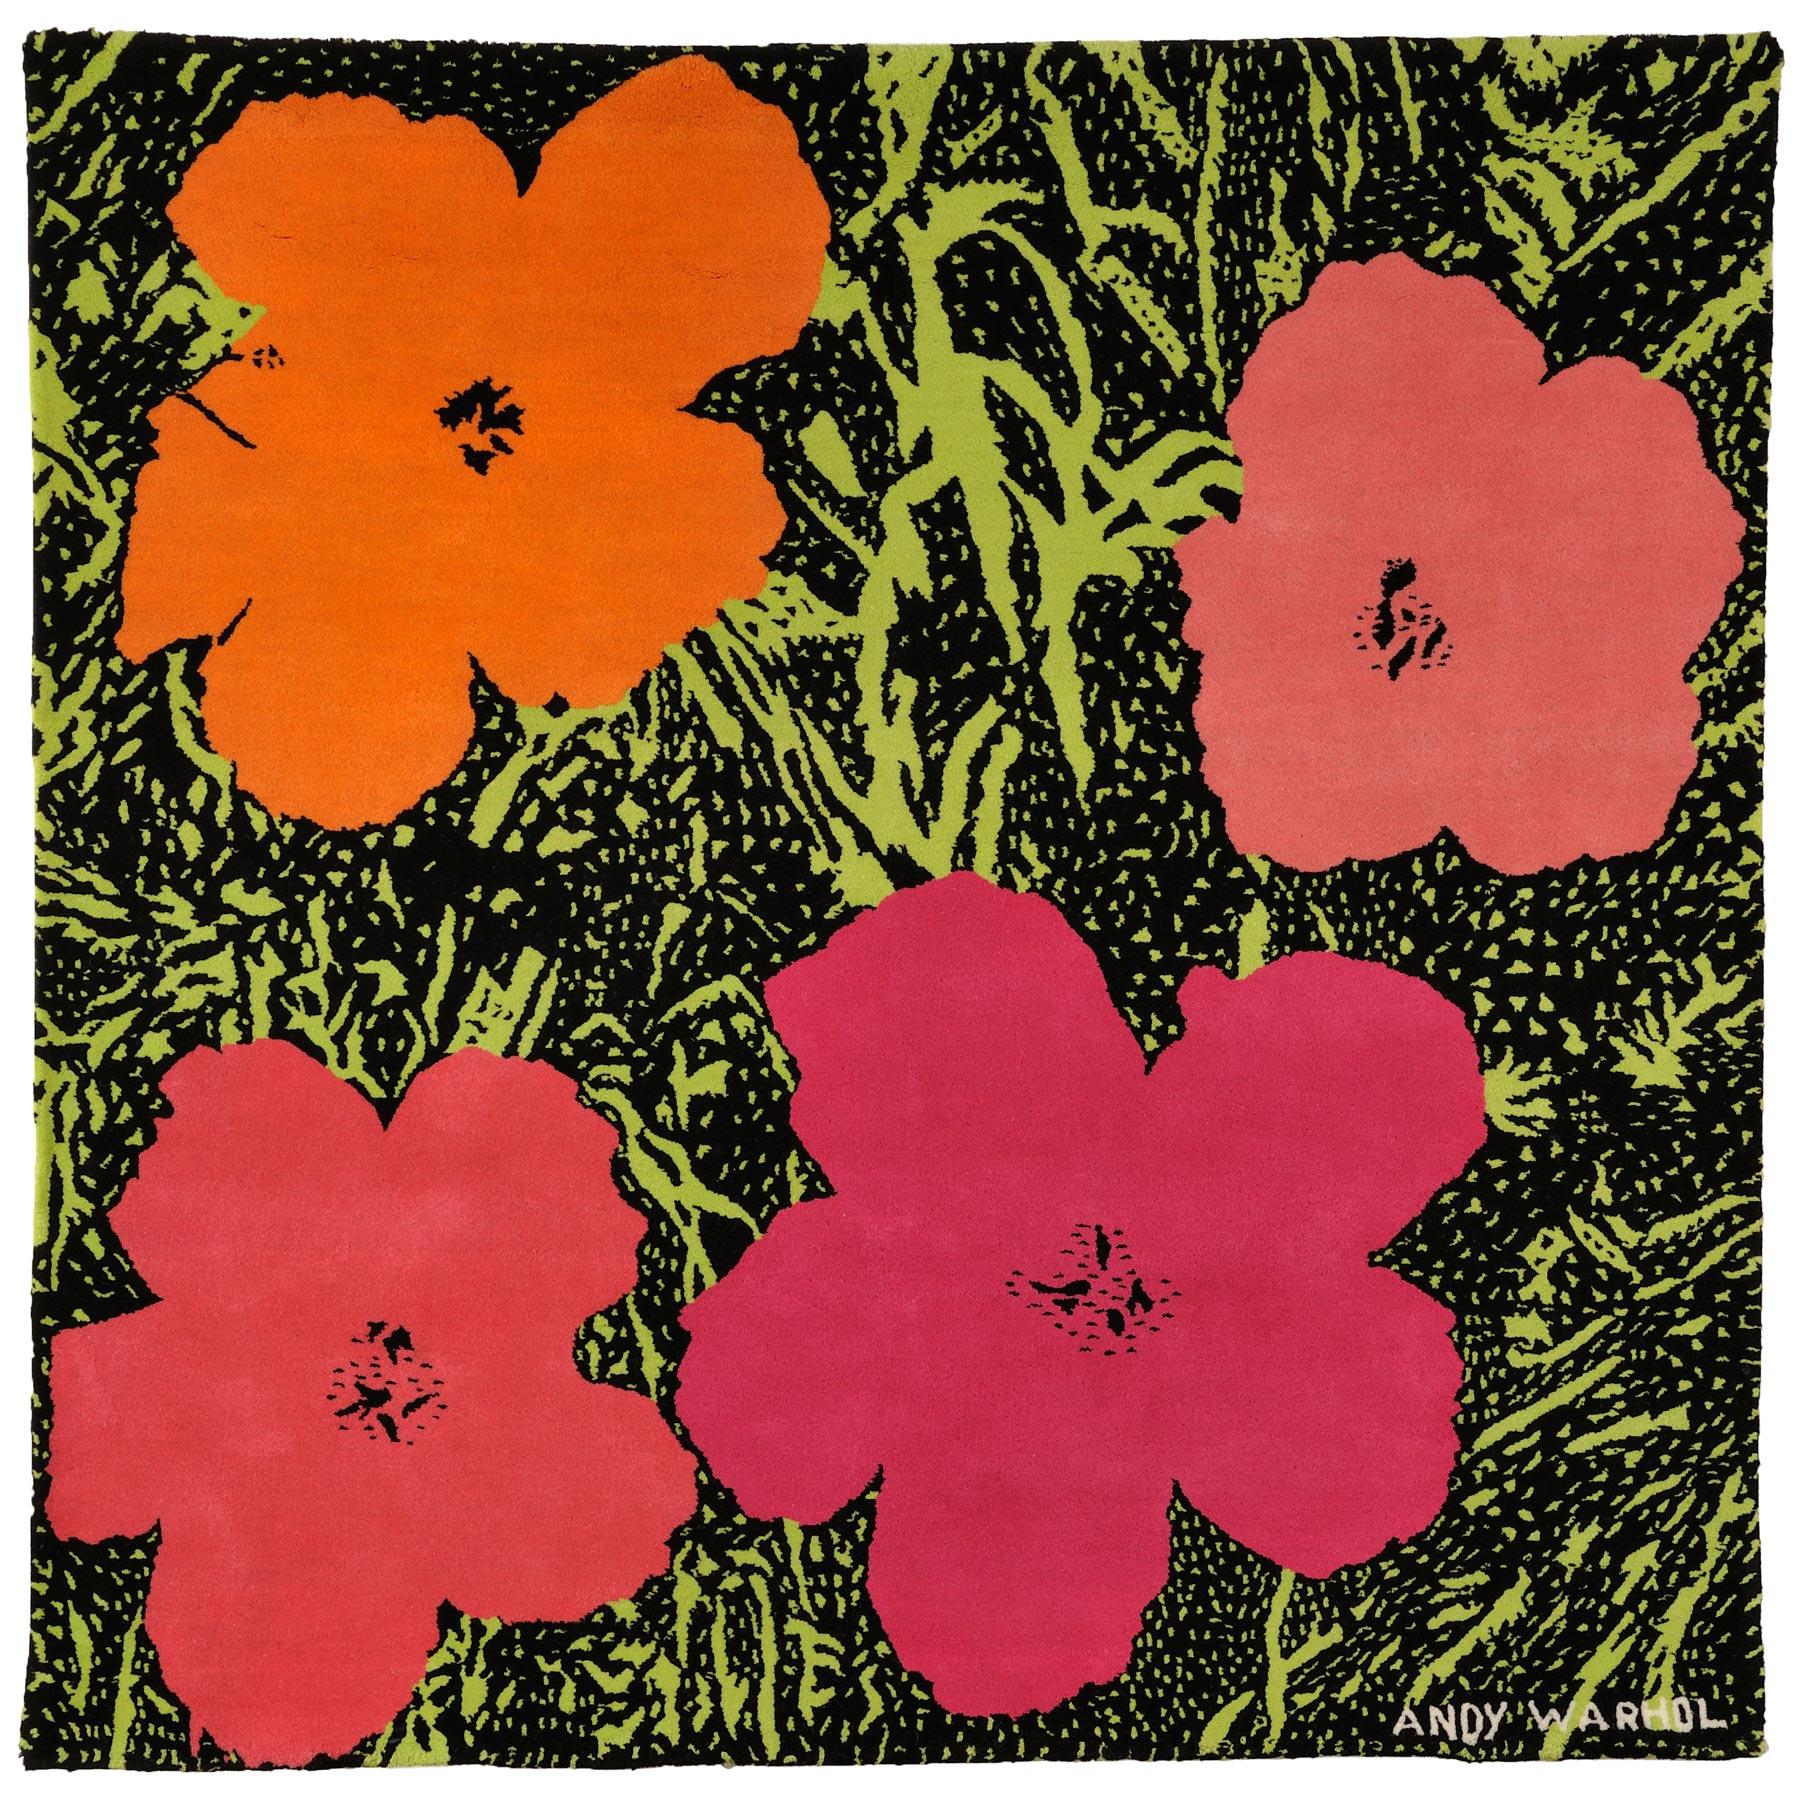 Flowers, After Andy Warhol-Pop Art, Tapestry, Edition, Contemporary, Design, Gif 1